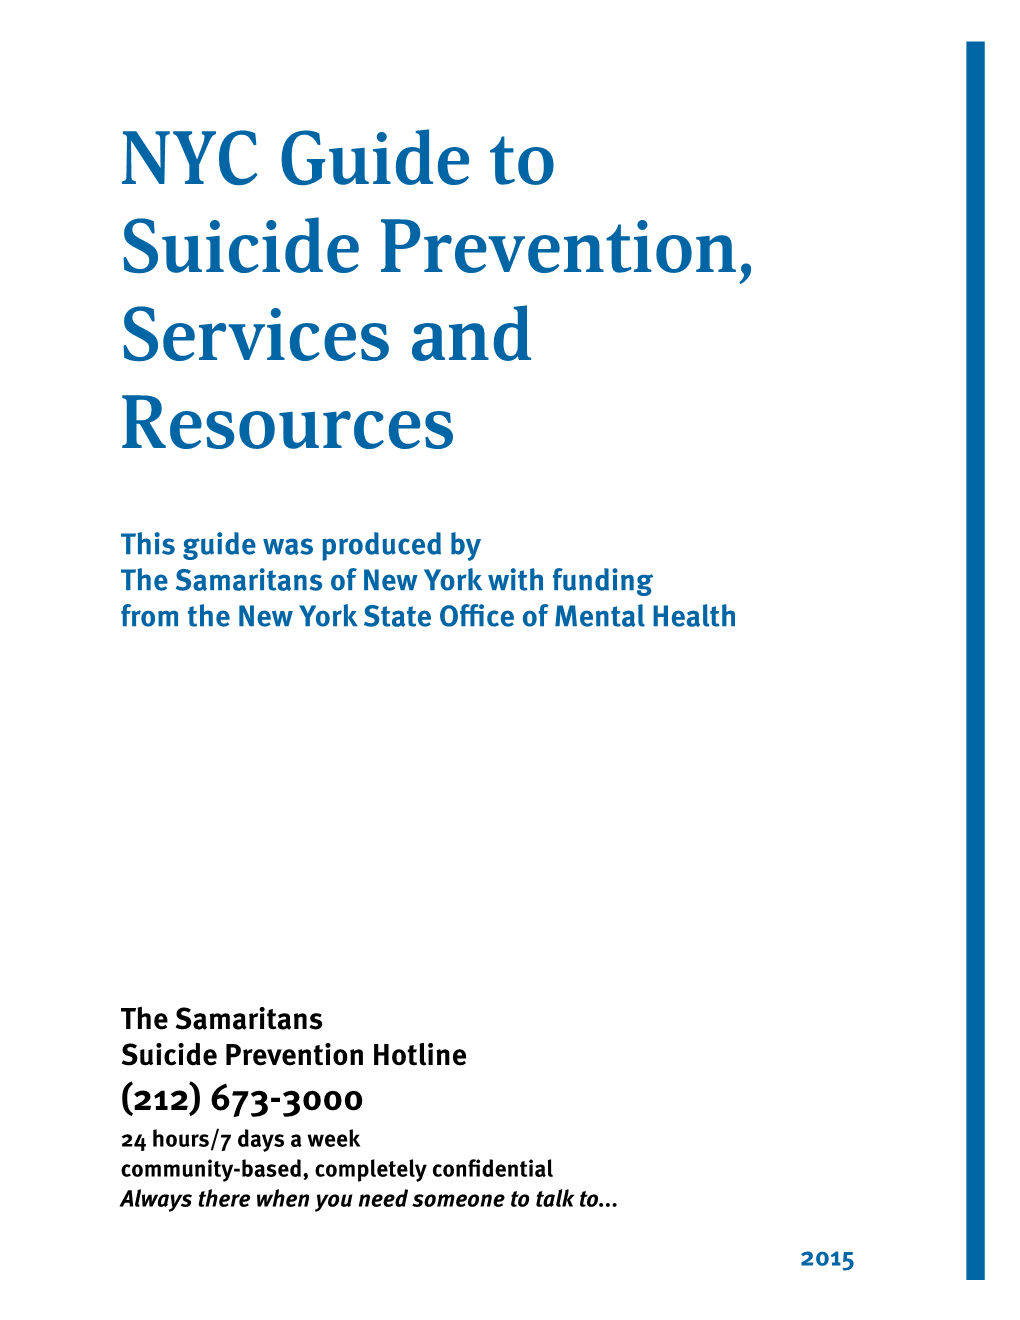 NYC Guide to Suicide Prevention, Services and Resources